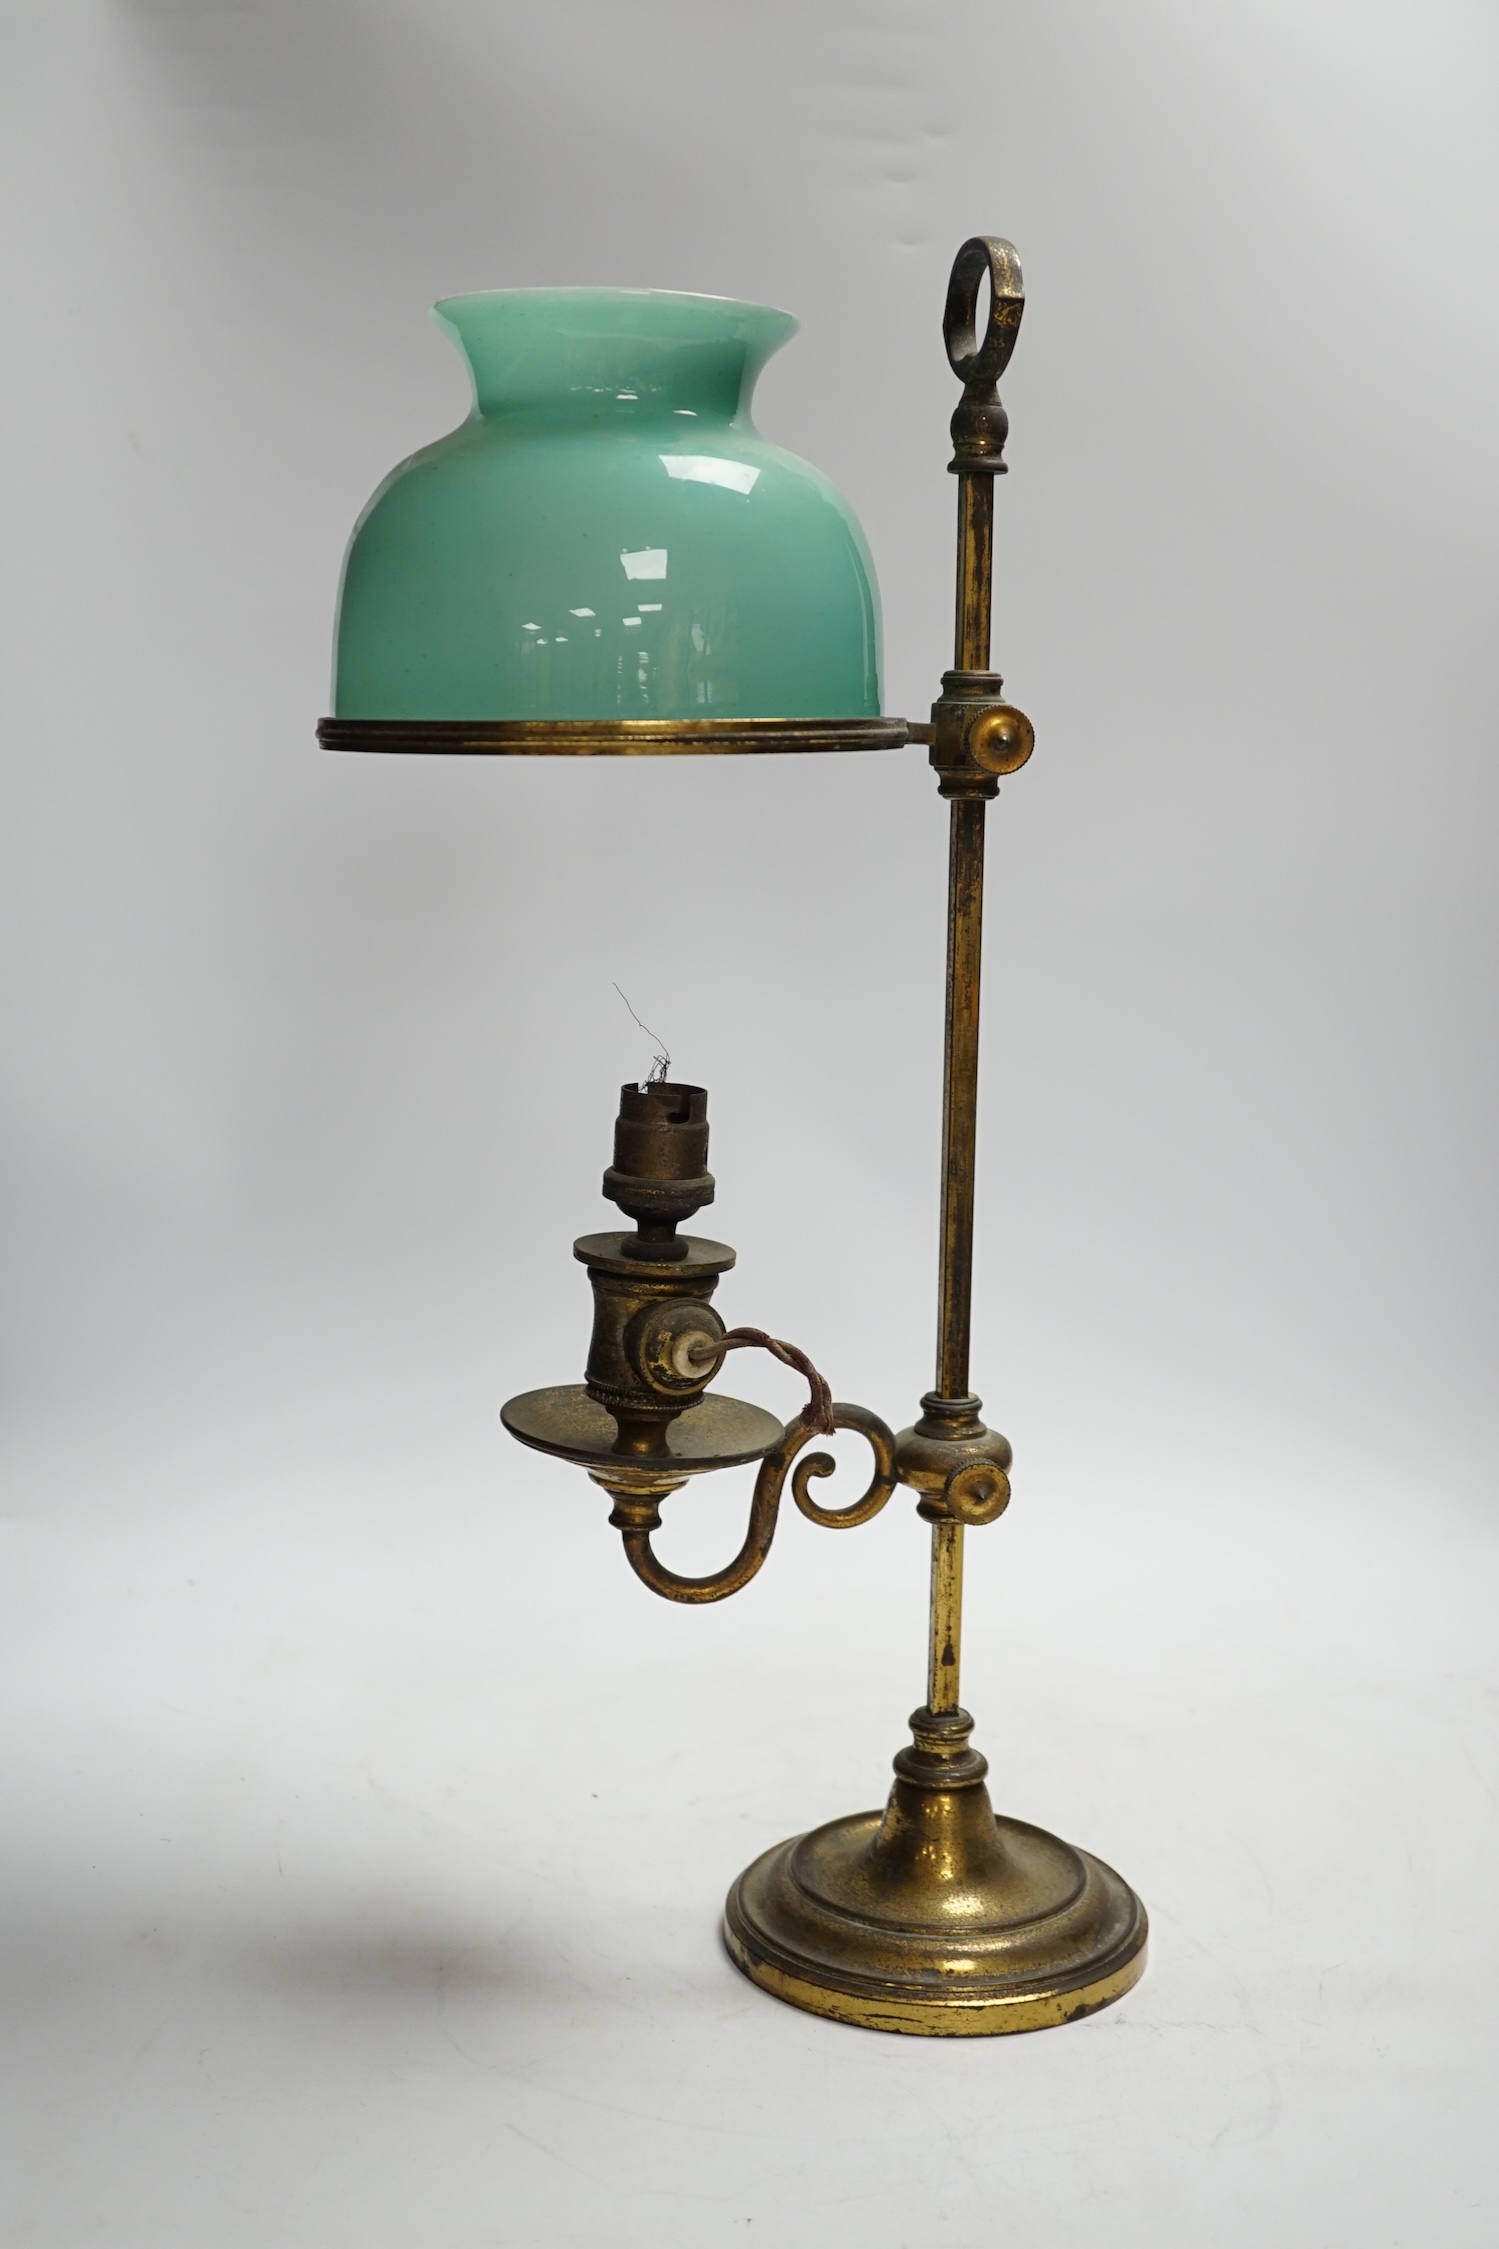 A brass desk lamp with green glass shade, circa 1920’s